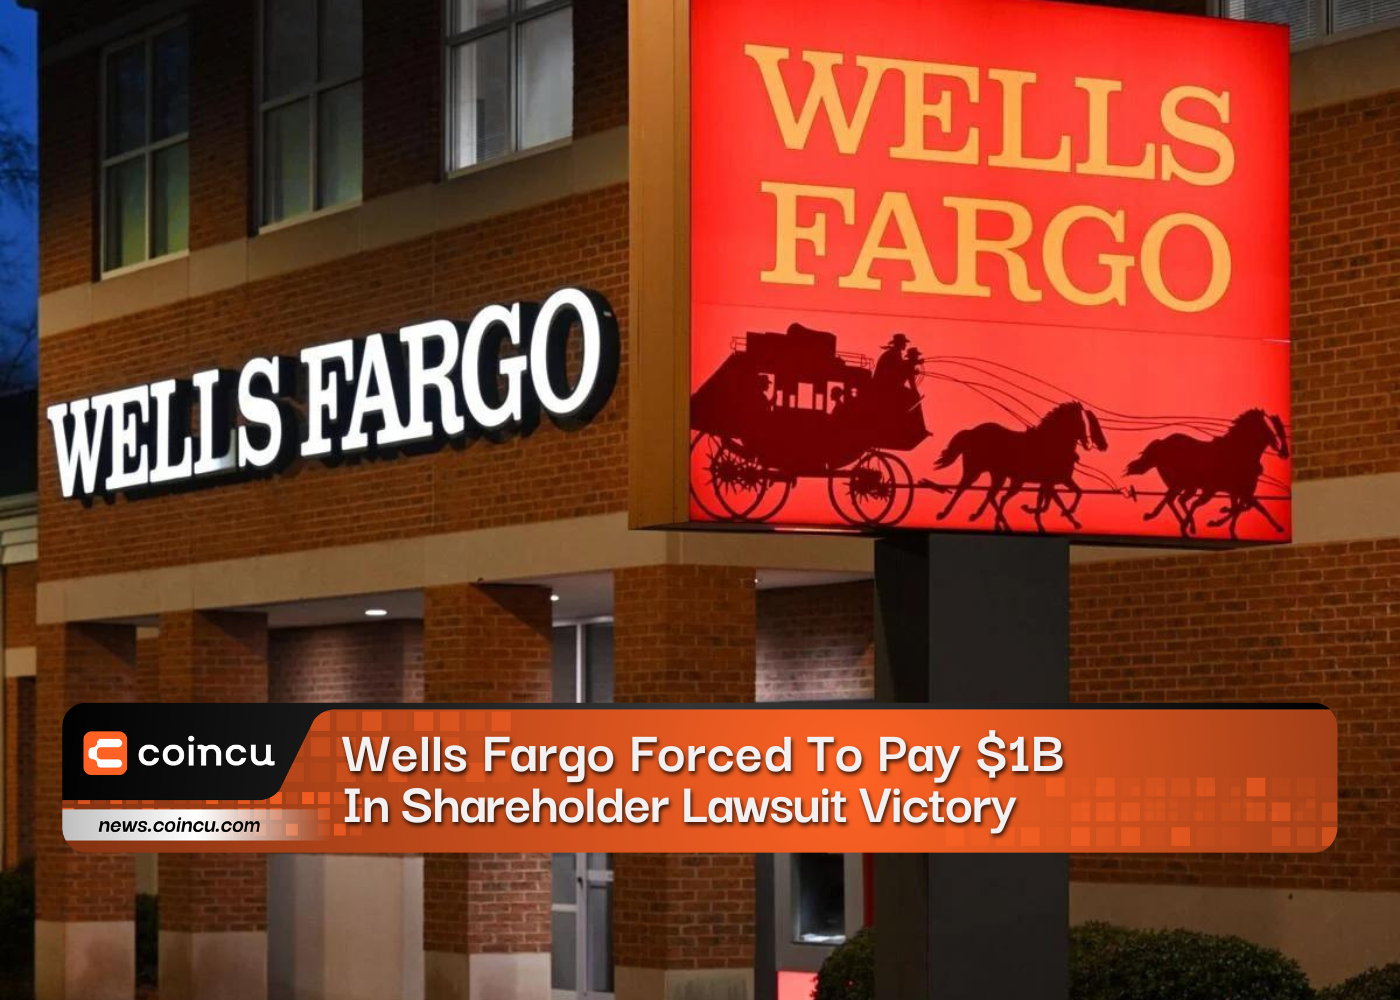 Wells Fargo Forced To Pay 1B